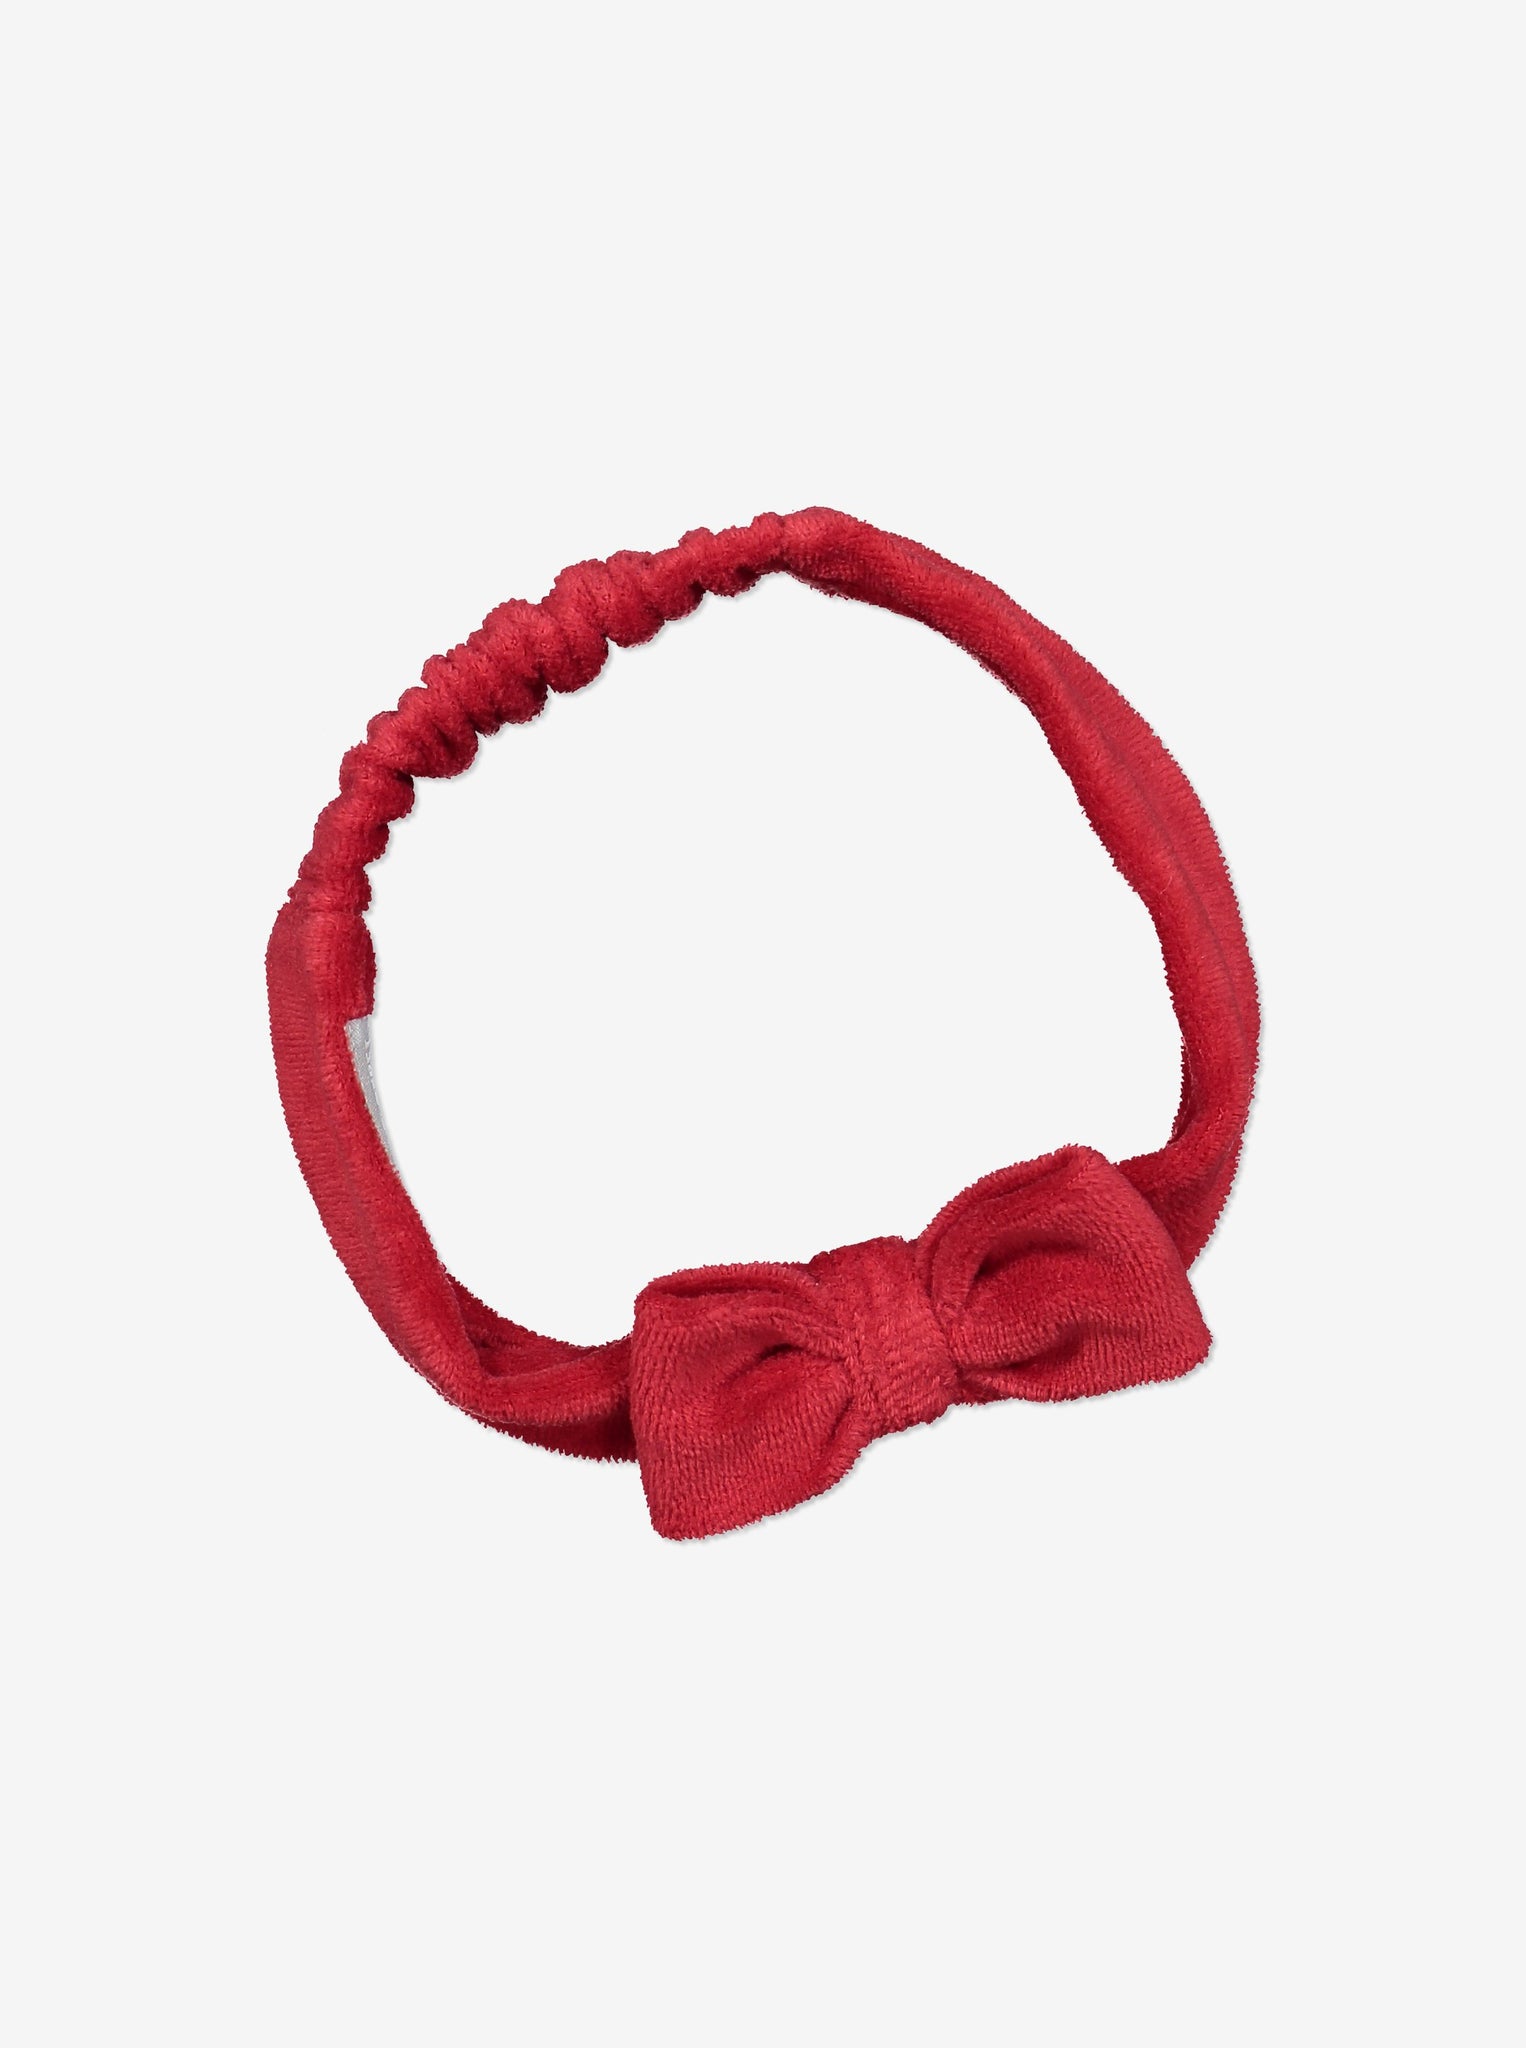 Girls red headband with bow, Perfect Baby Gifts 